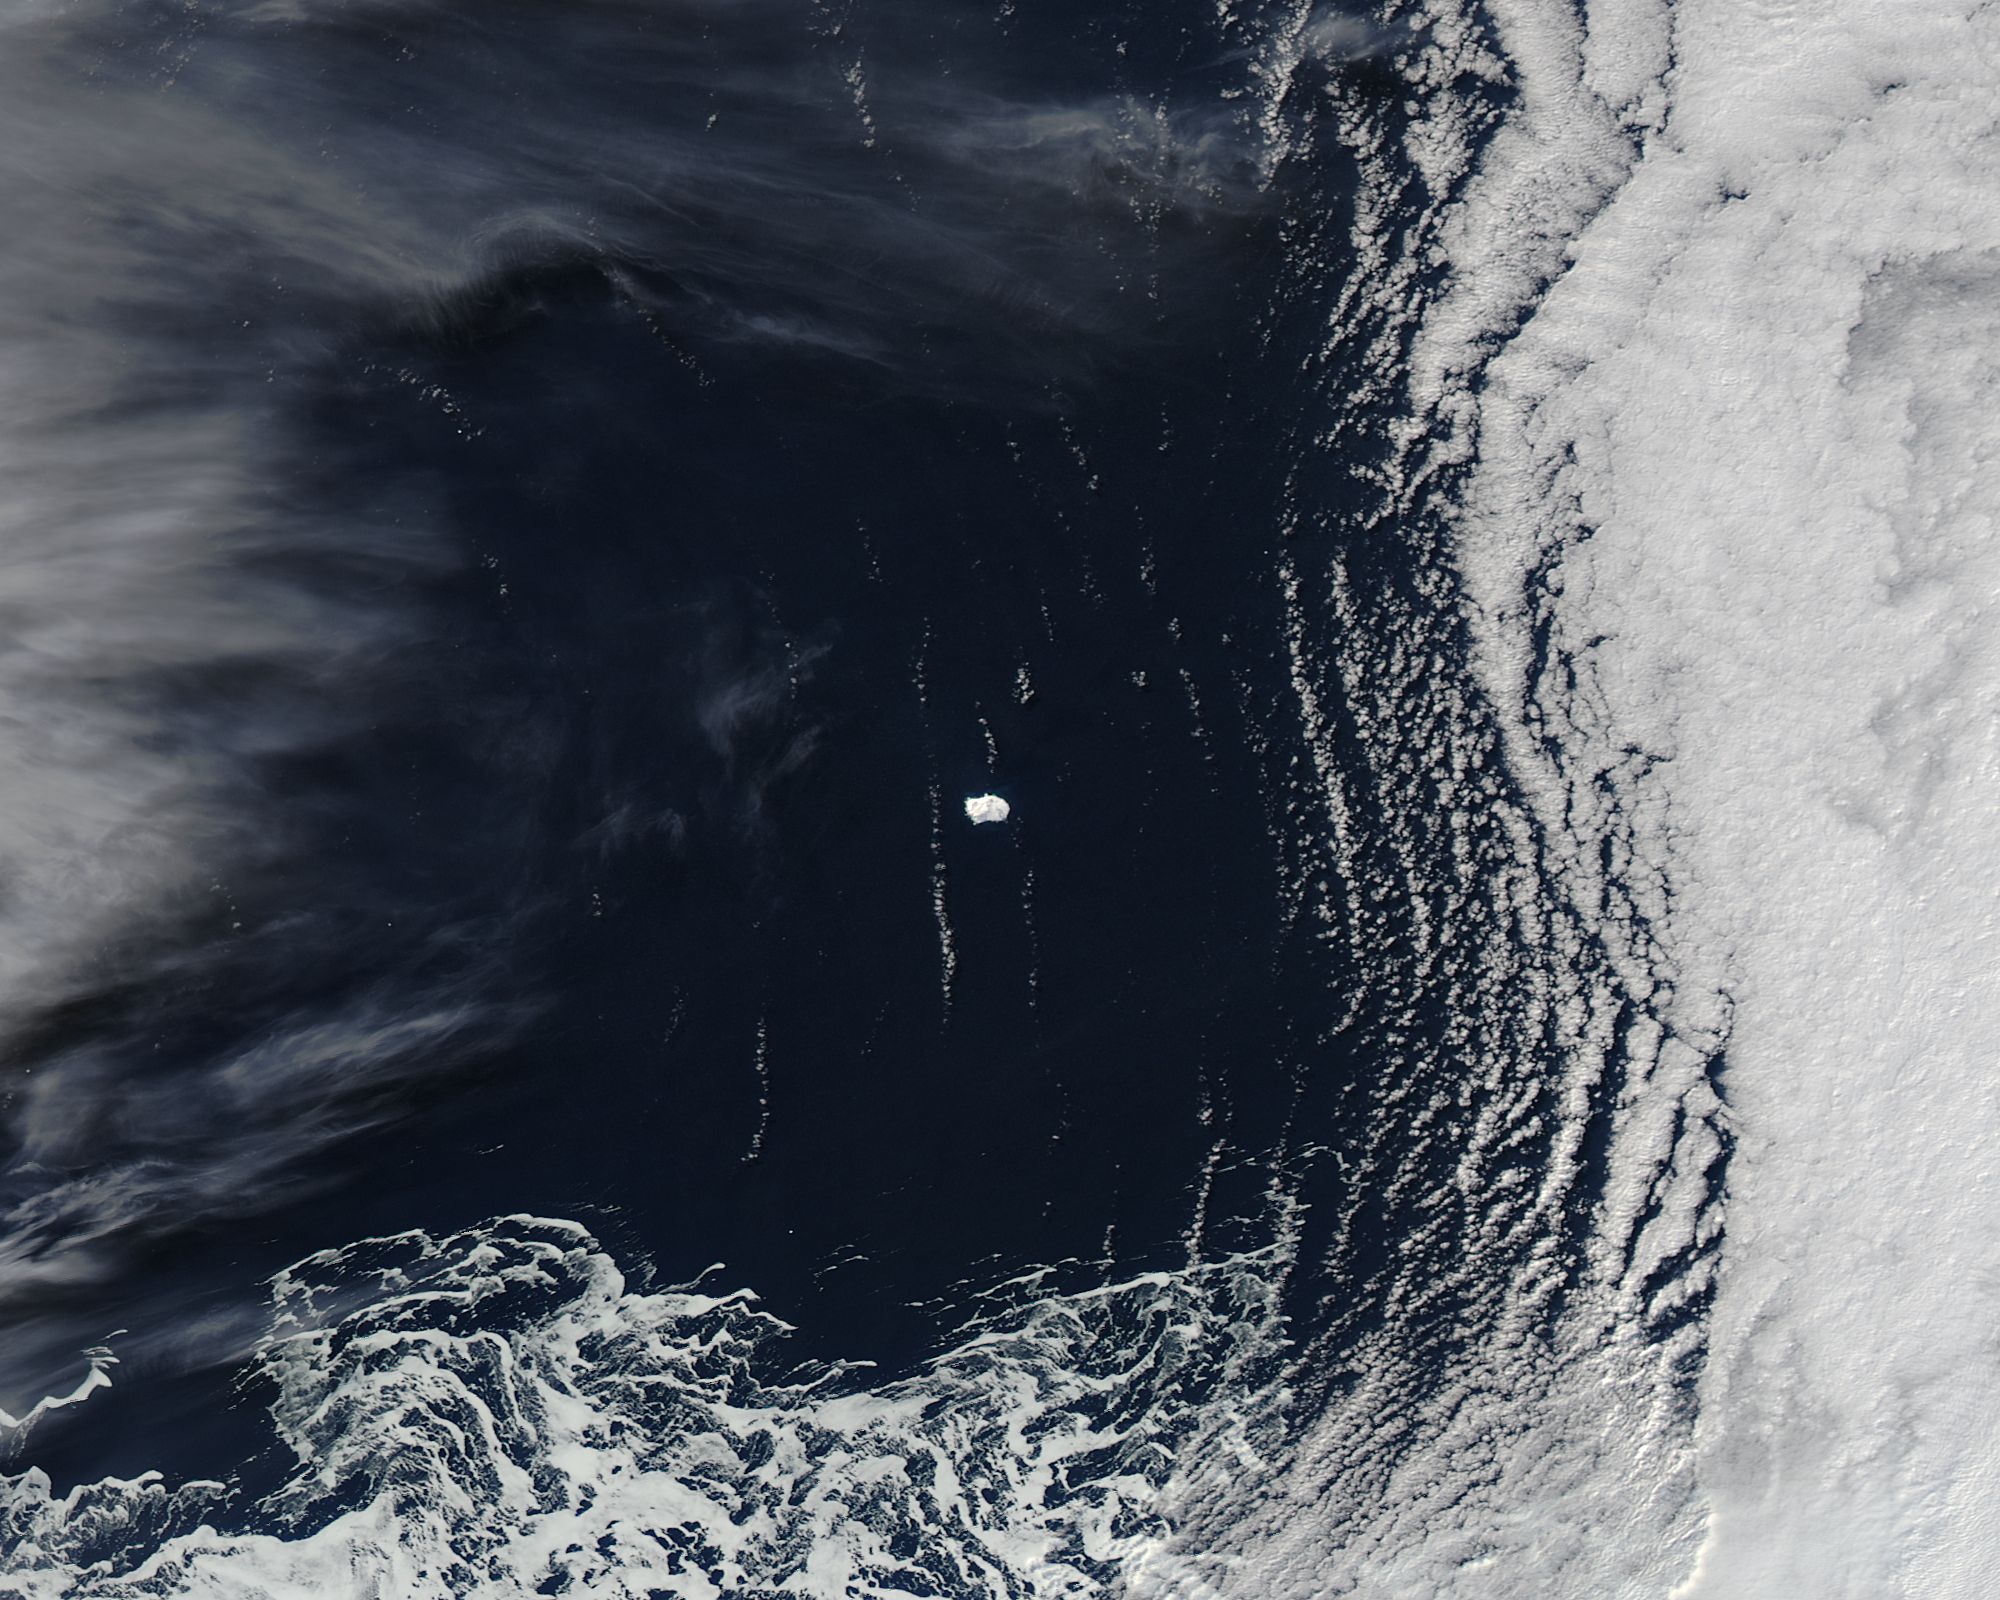 Bouvet Island, South Atlantic Ocean - related image preview